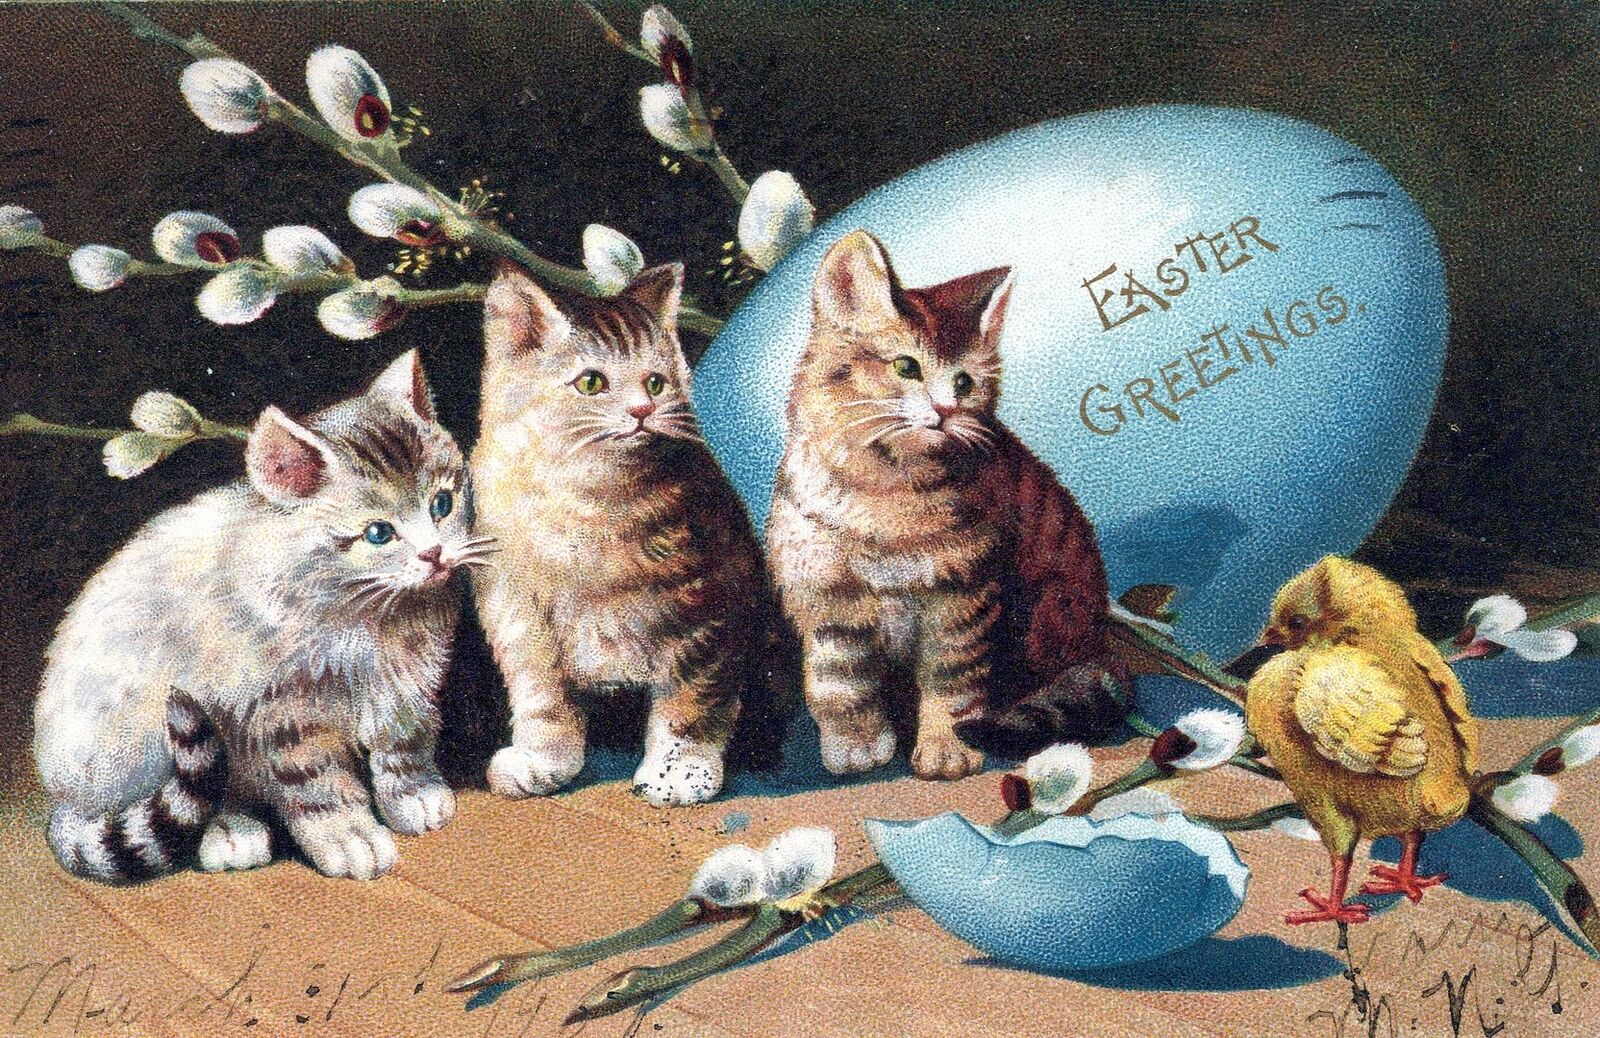 EASTER - Three Cats, Chick And Pussy Willows - udb - 1907